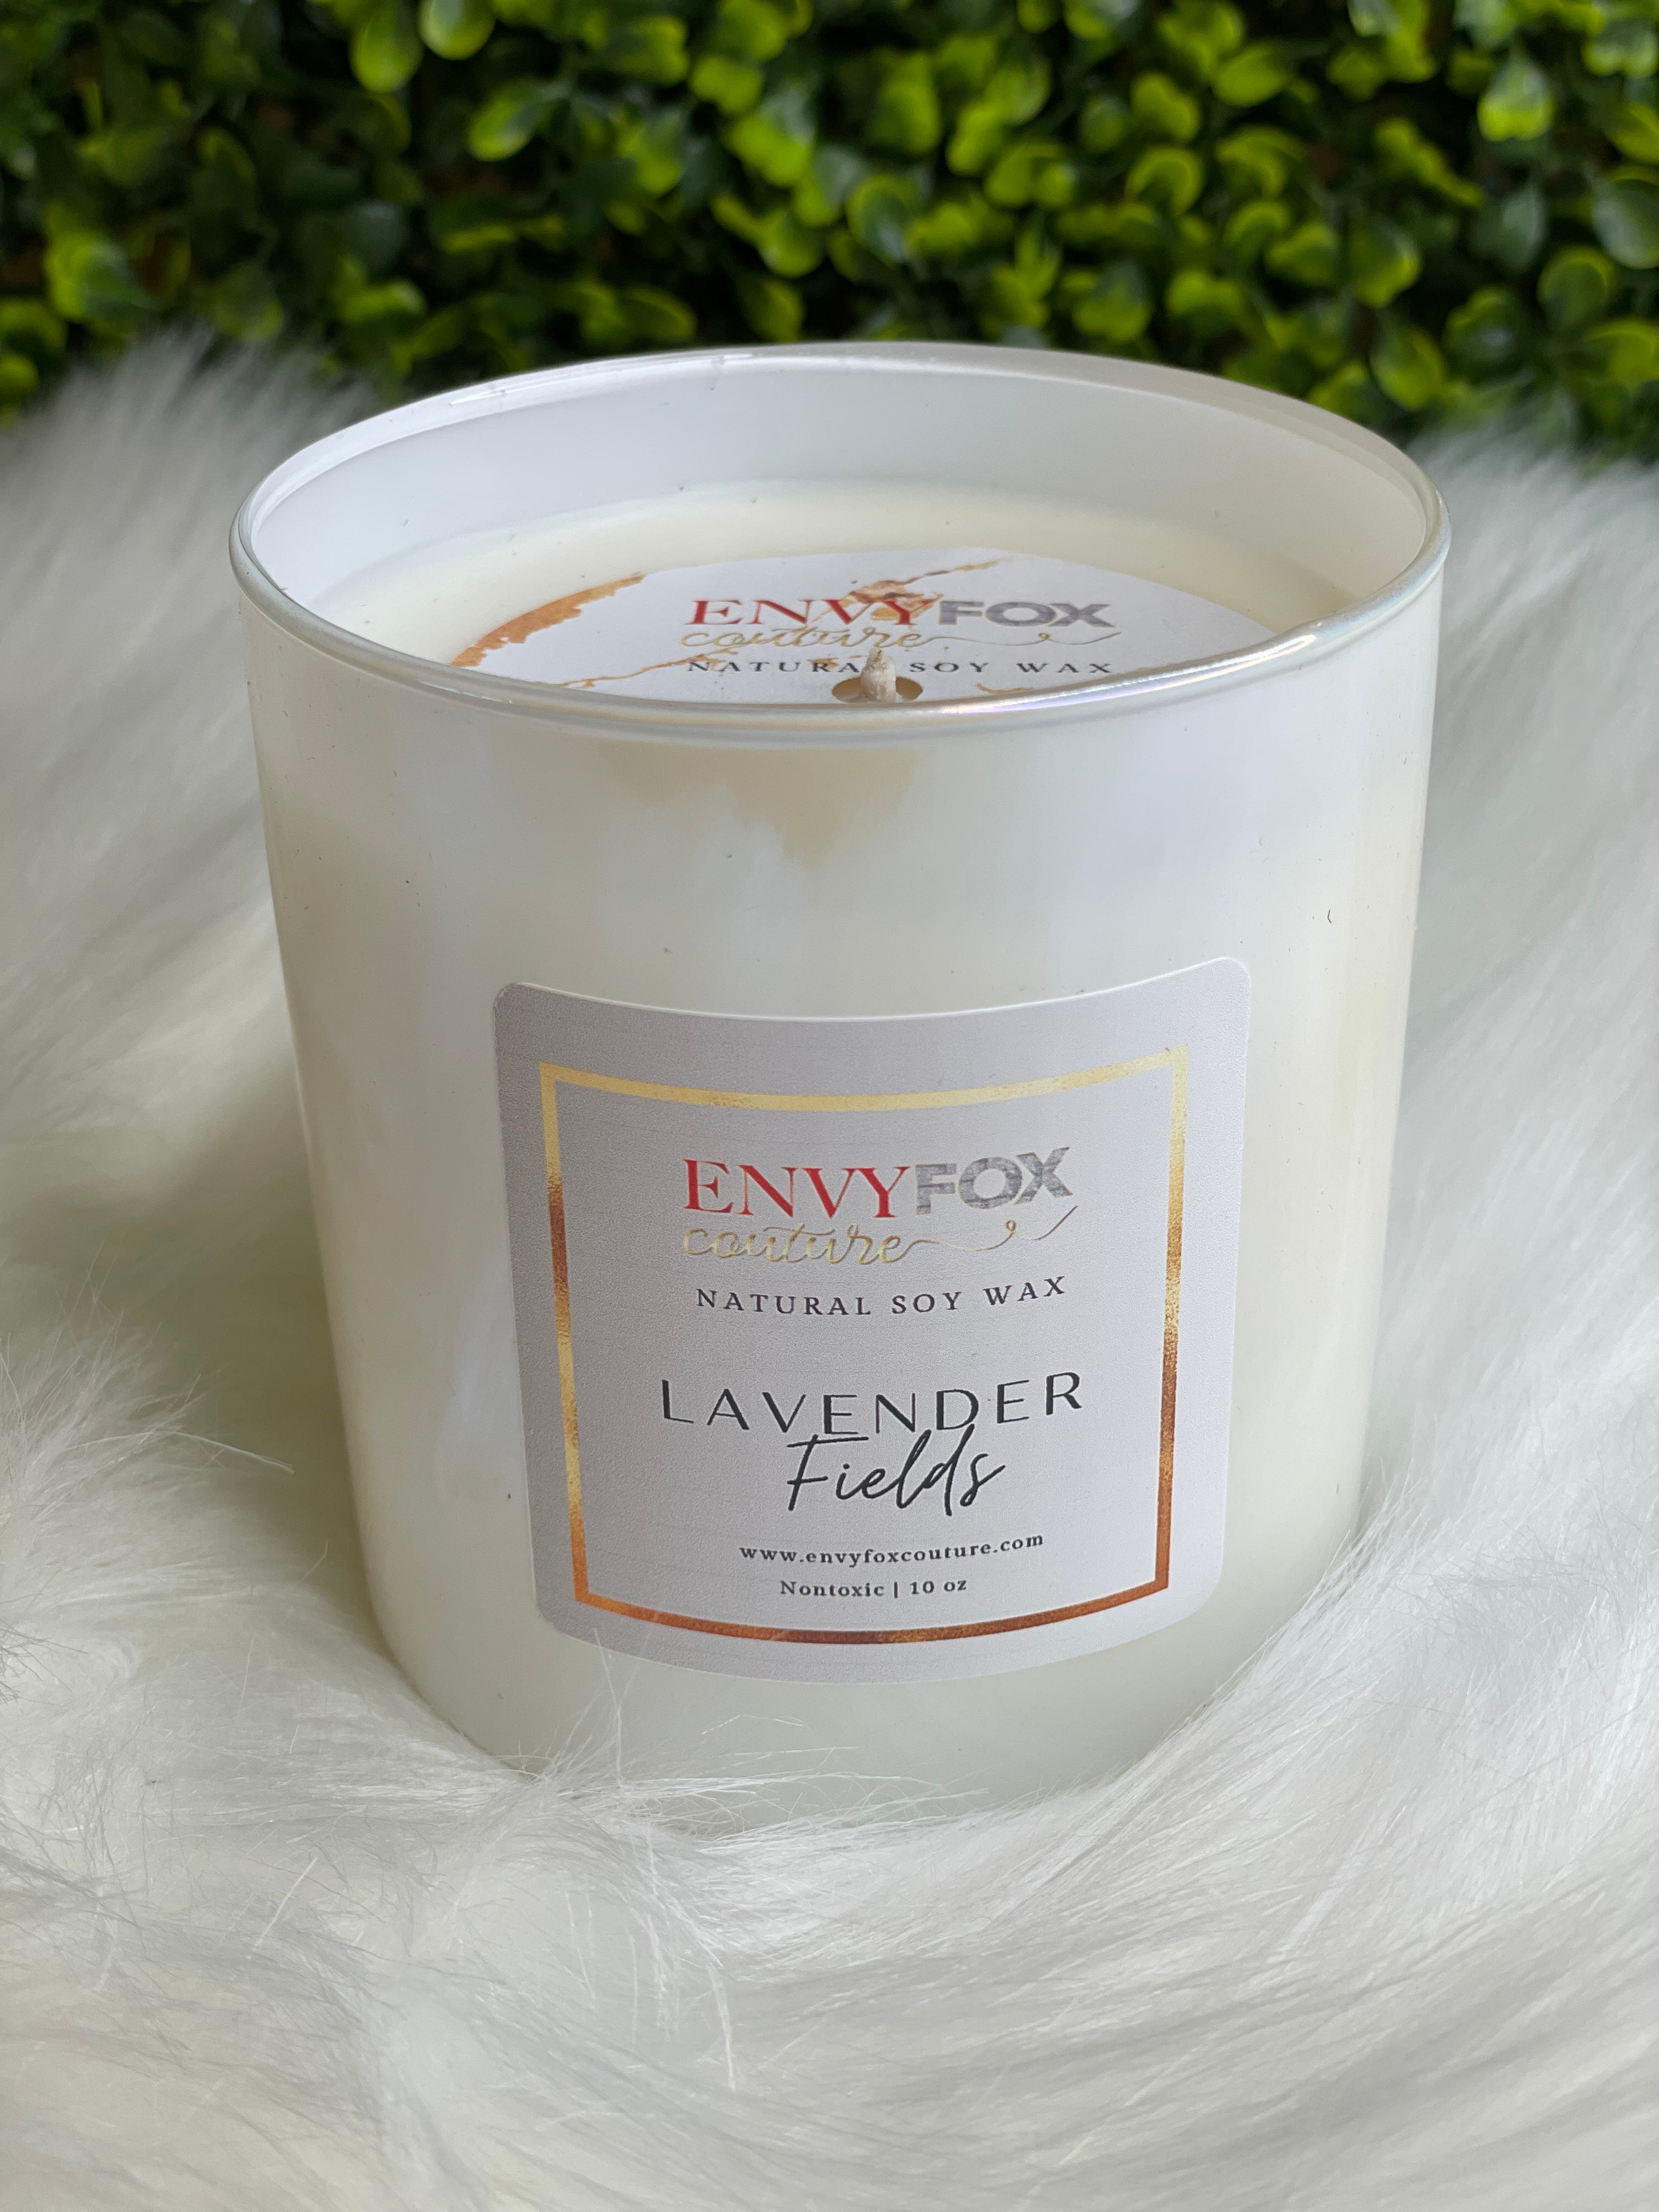 Lavender Fields 10 oz Natural Soy Wax Candle